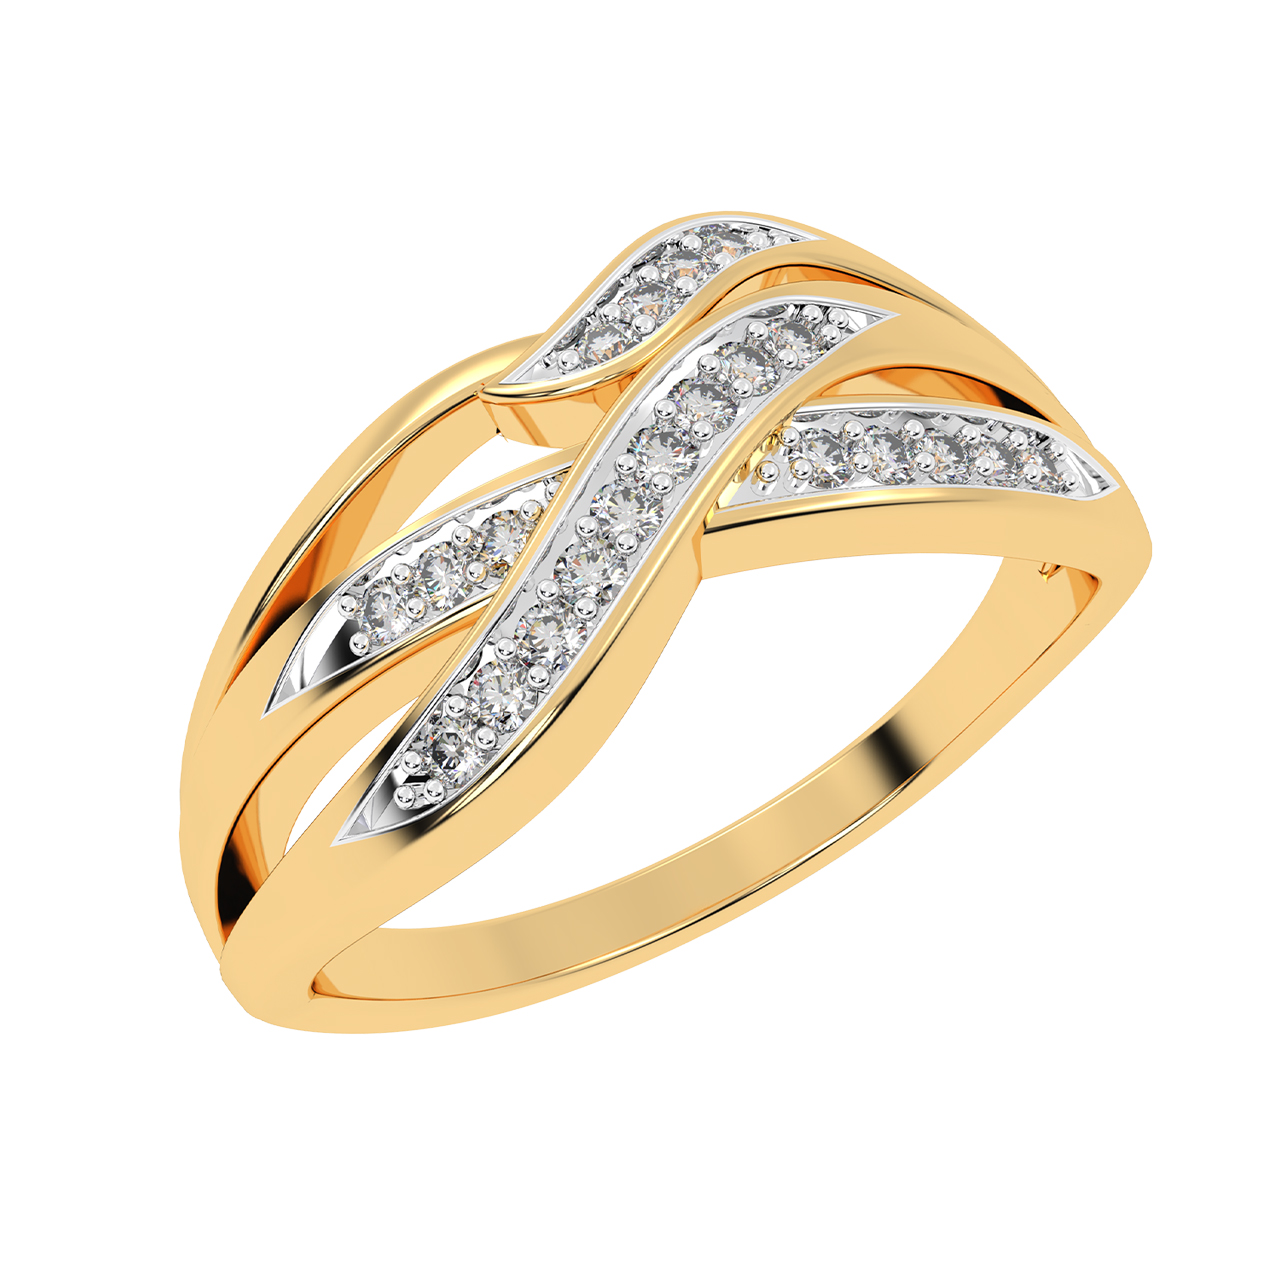 Ladies Fashionable And Comfortable Stylish Silver And Golden Diamond Ring  Diamond Carat Weight: 5.2 G Grain at Best Price in Ajmer | Samarpan  Jewellers